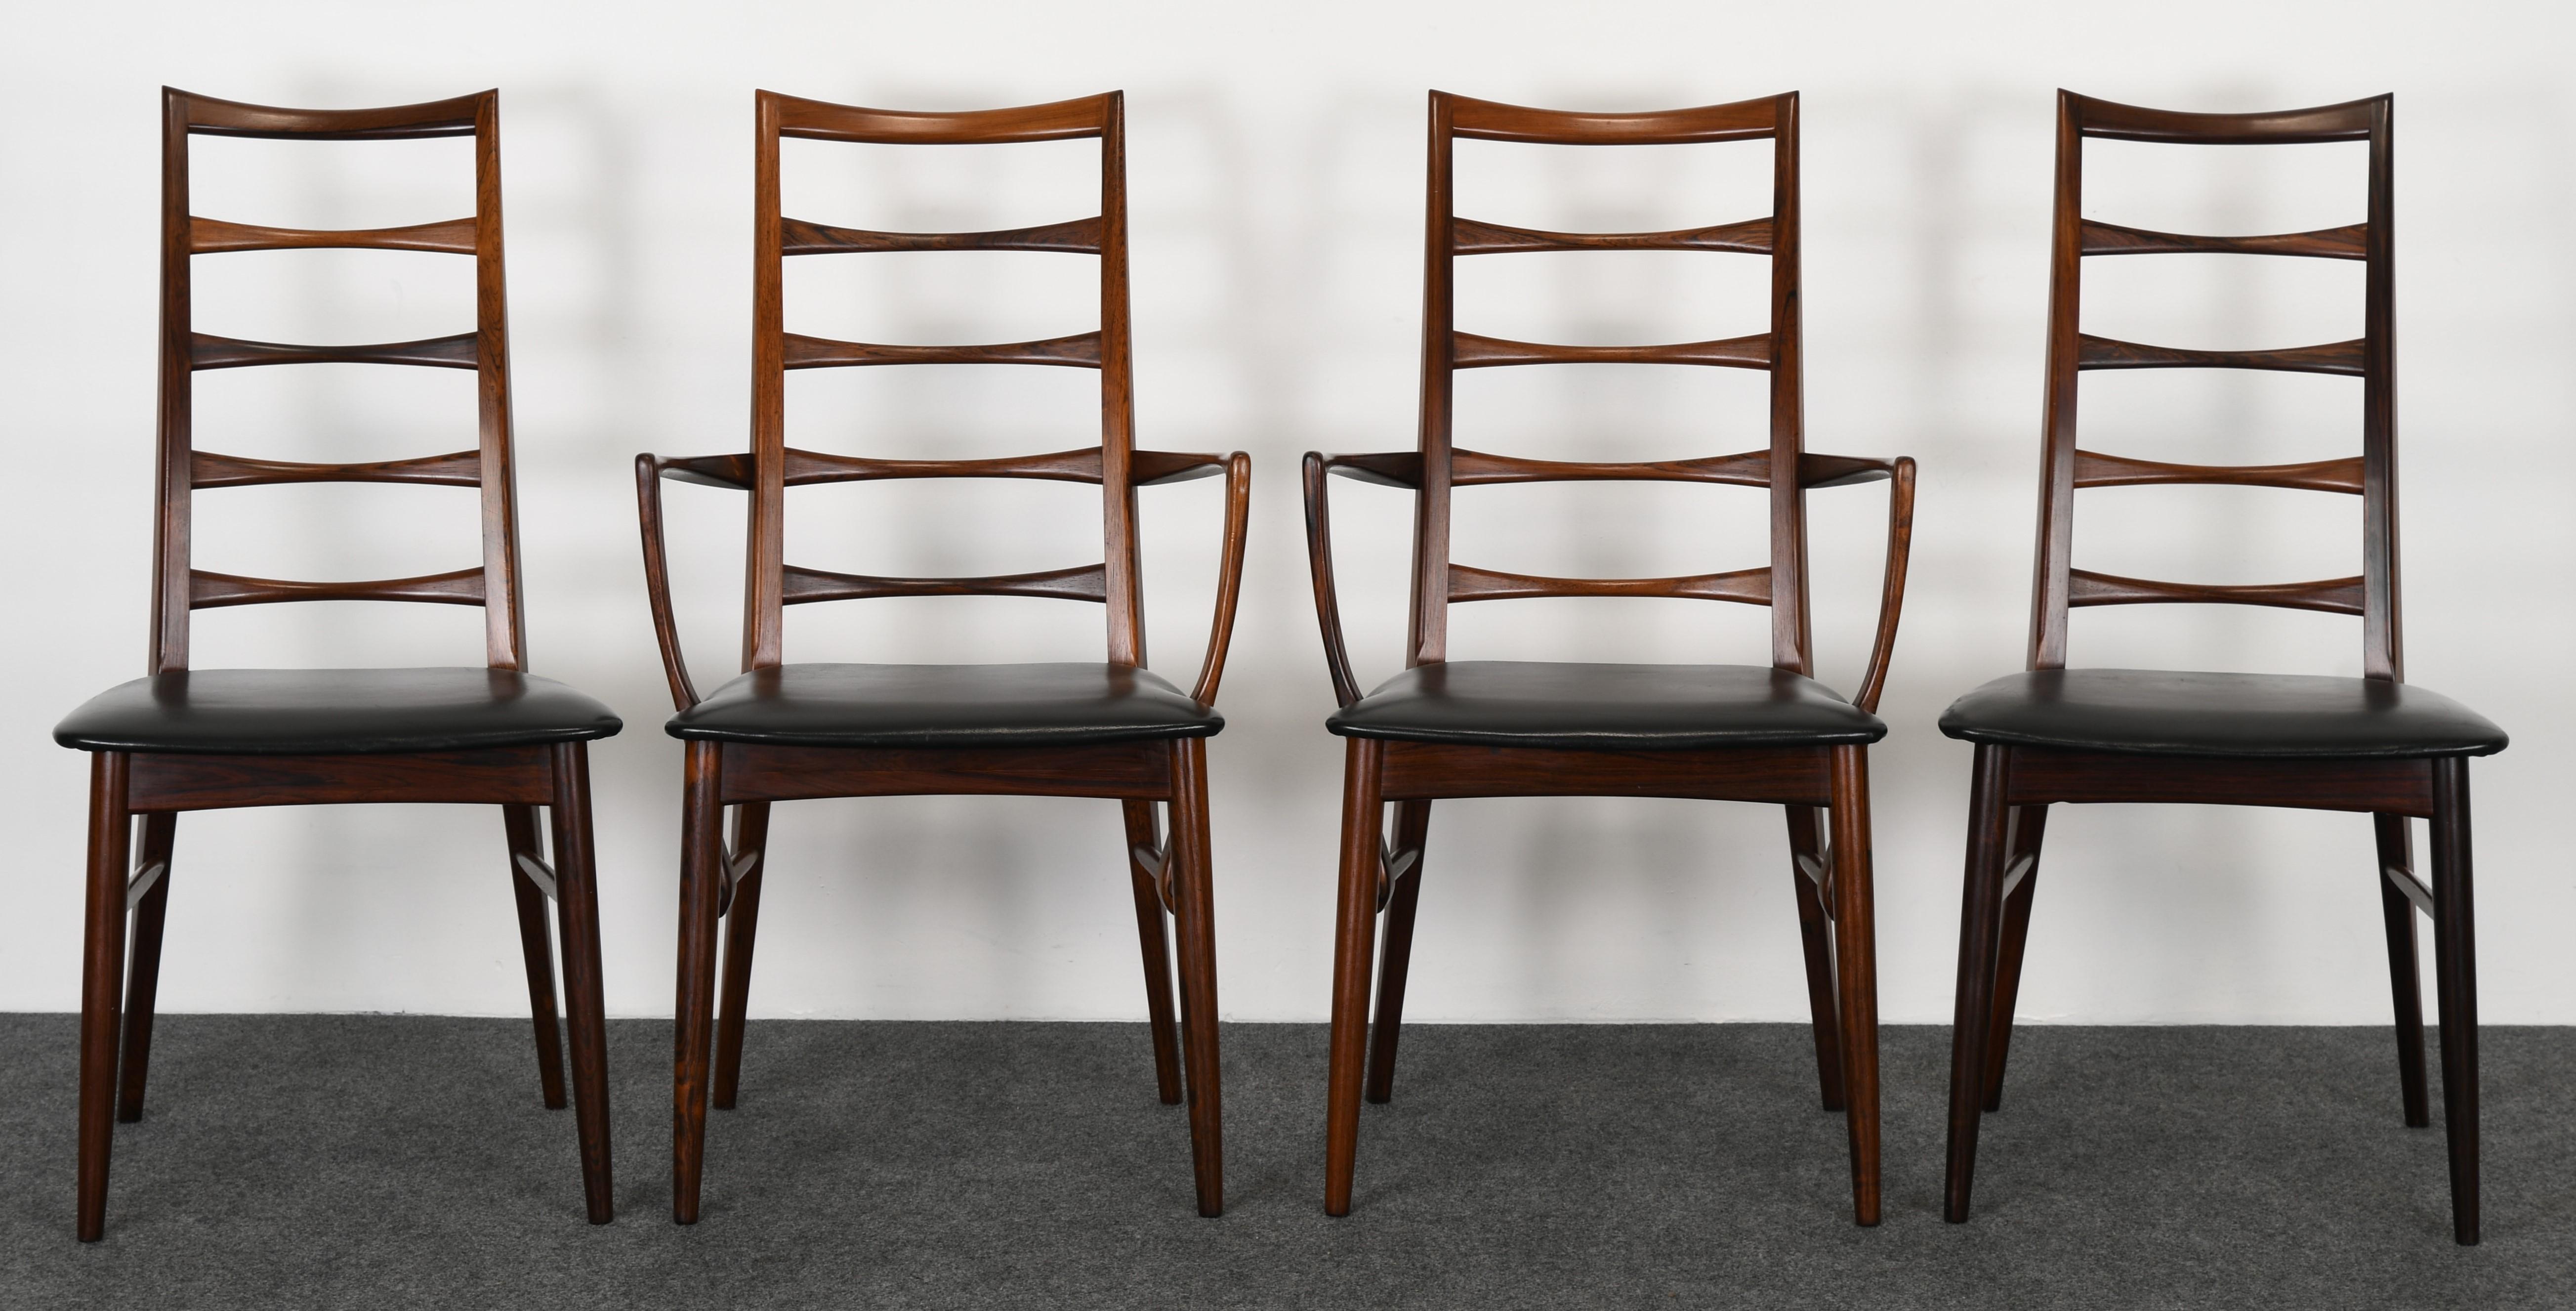 A gorgeous set of eight Koefoeds Hornslet rosewood dining chairs designed by Niels Koefoed, 1950s. This set has six side chairs and two armchairs. The chairs are structurally sound and in very good condition. The six side chairs are covered in faux